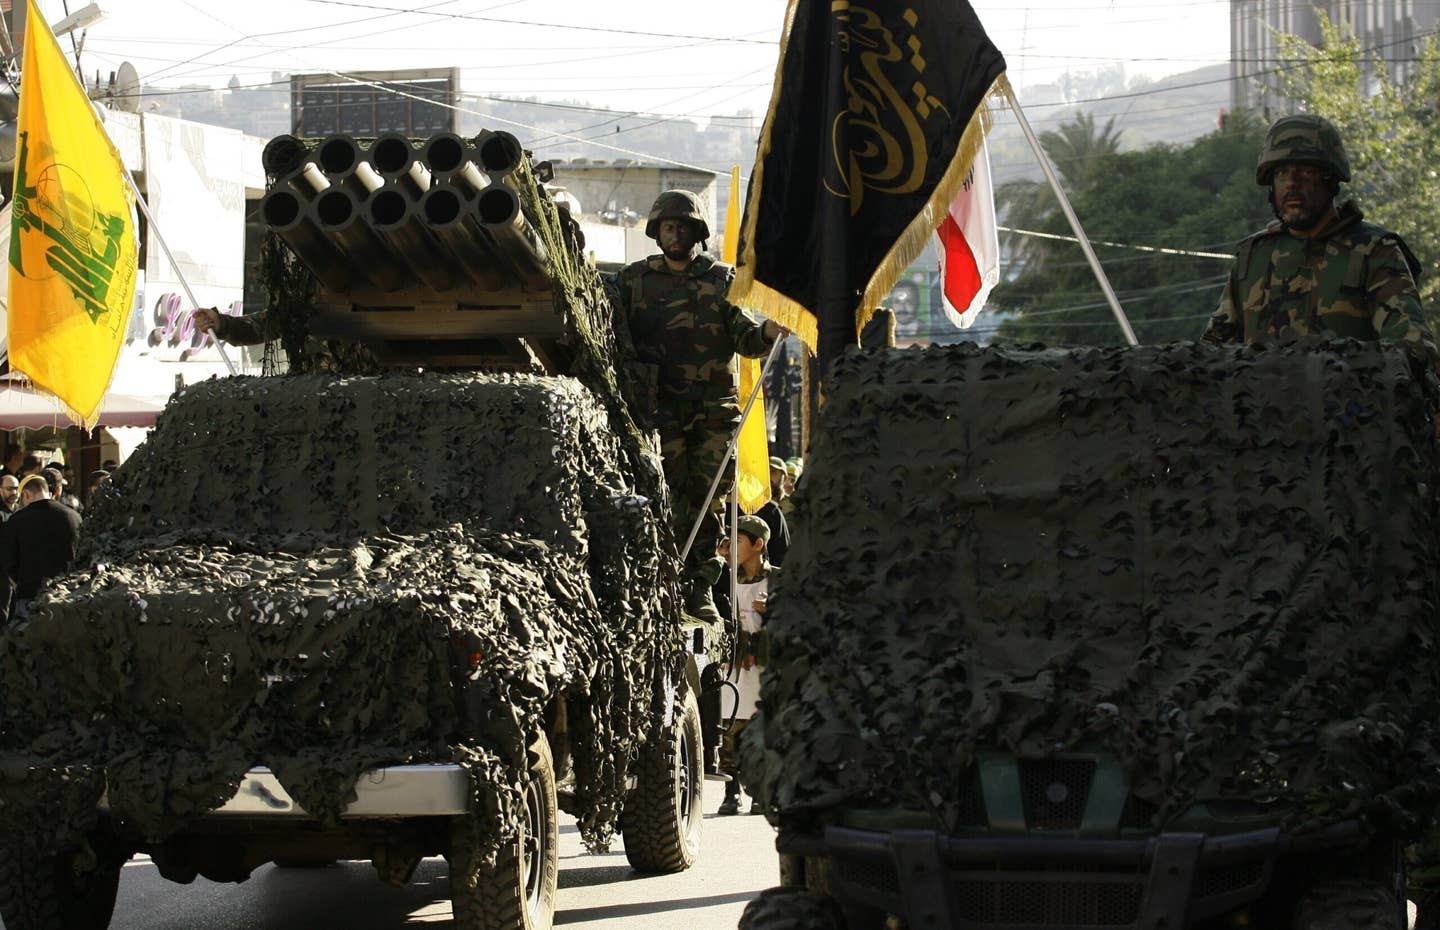 Members of Hezbollah stand on a pick-up truck mounted with a multiple rocket launcher as they take part in a parade in the southern city of Nabatiyeh on November 7, 2014. <em>MAHMOUD ZAYYAT/AFP via Getty Images</em>